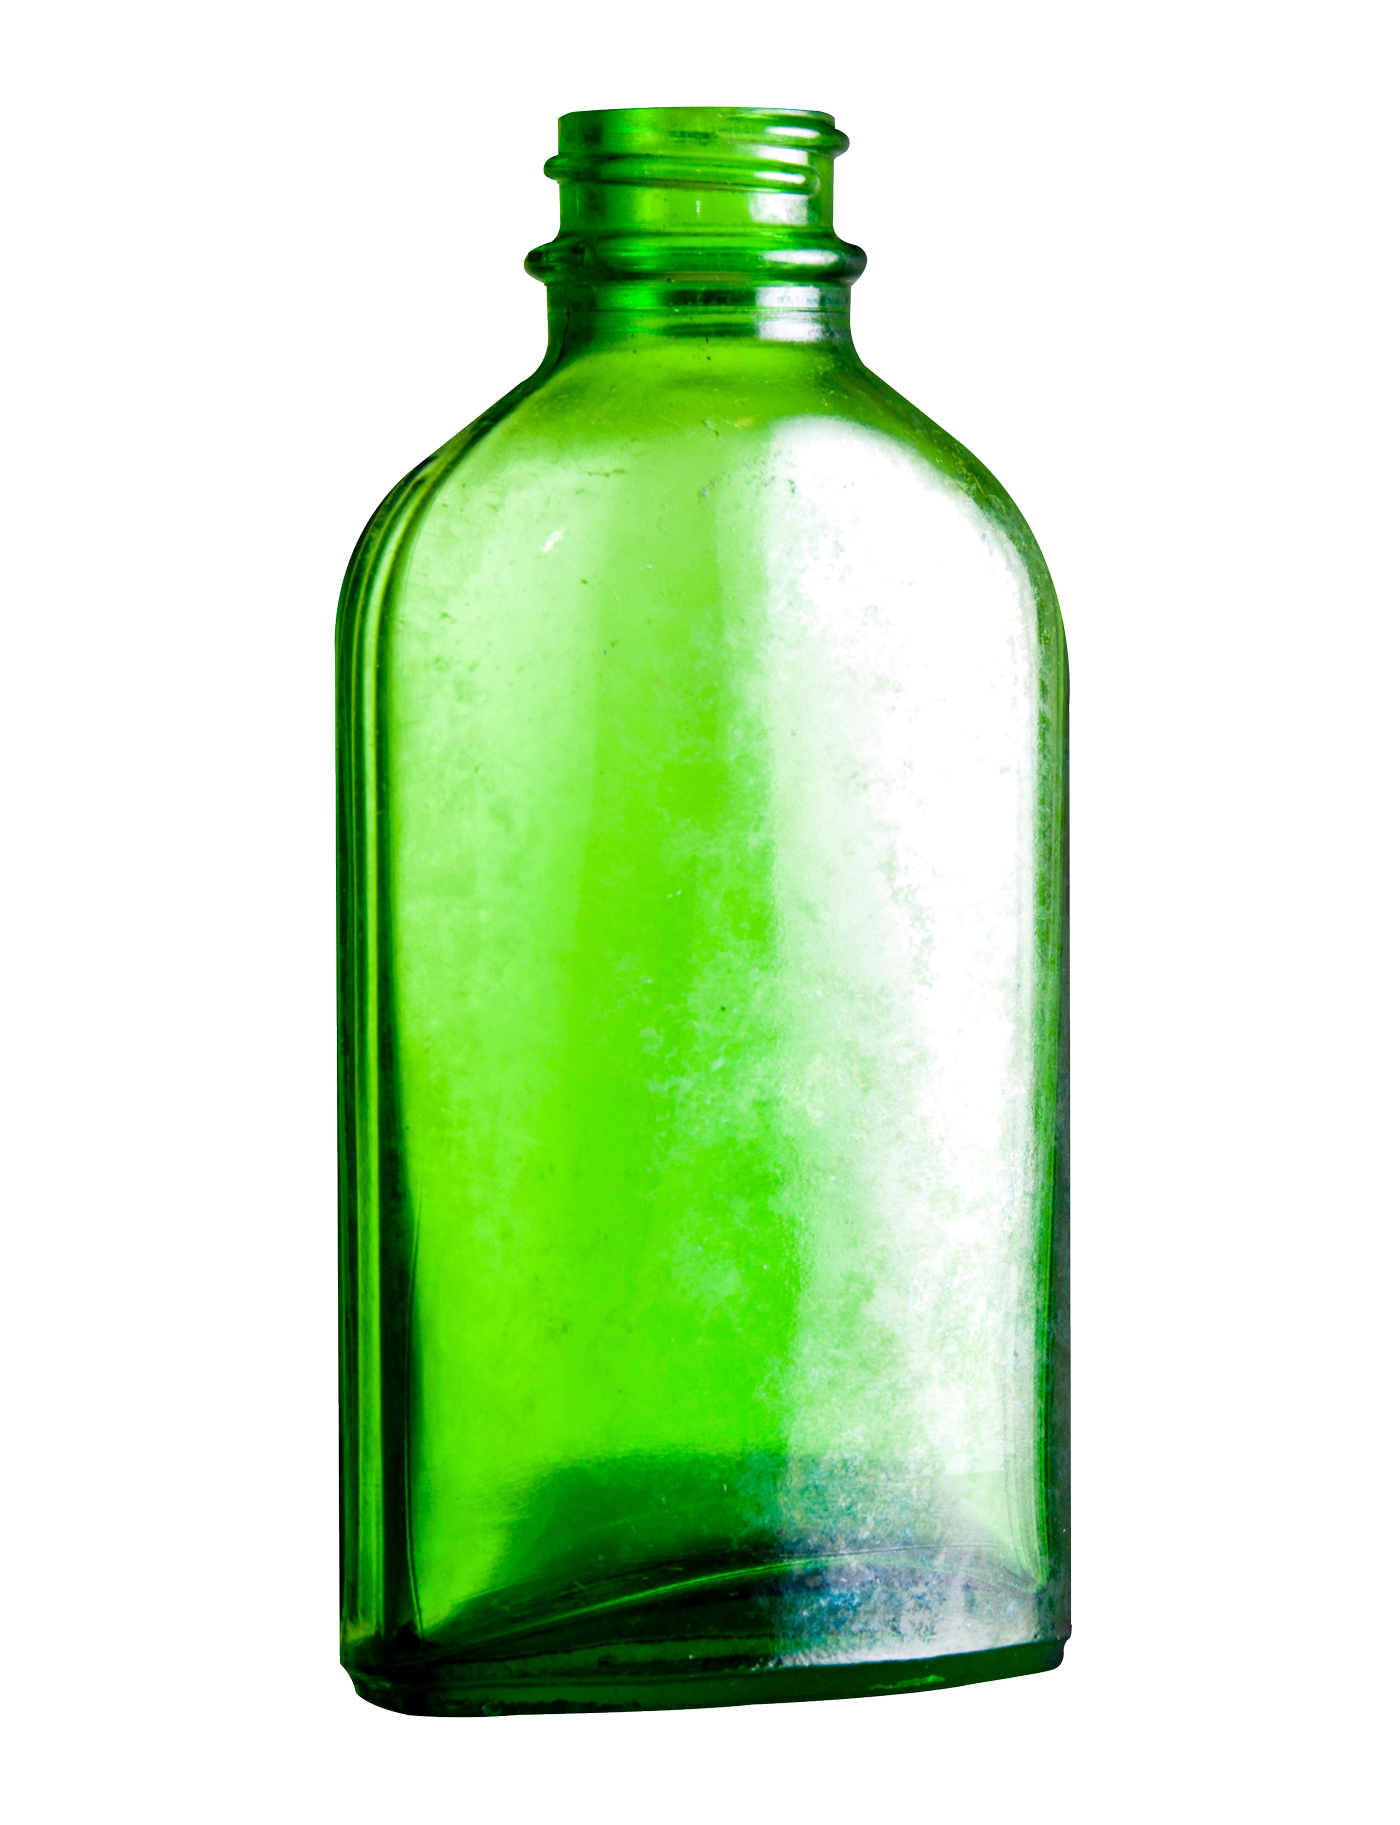 Empty bottle png. Glass image purepng free